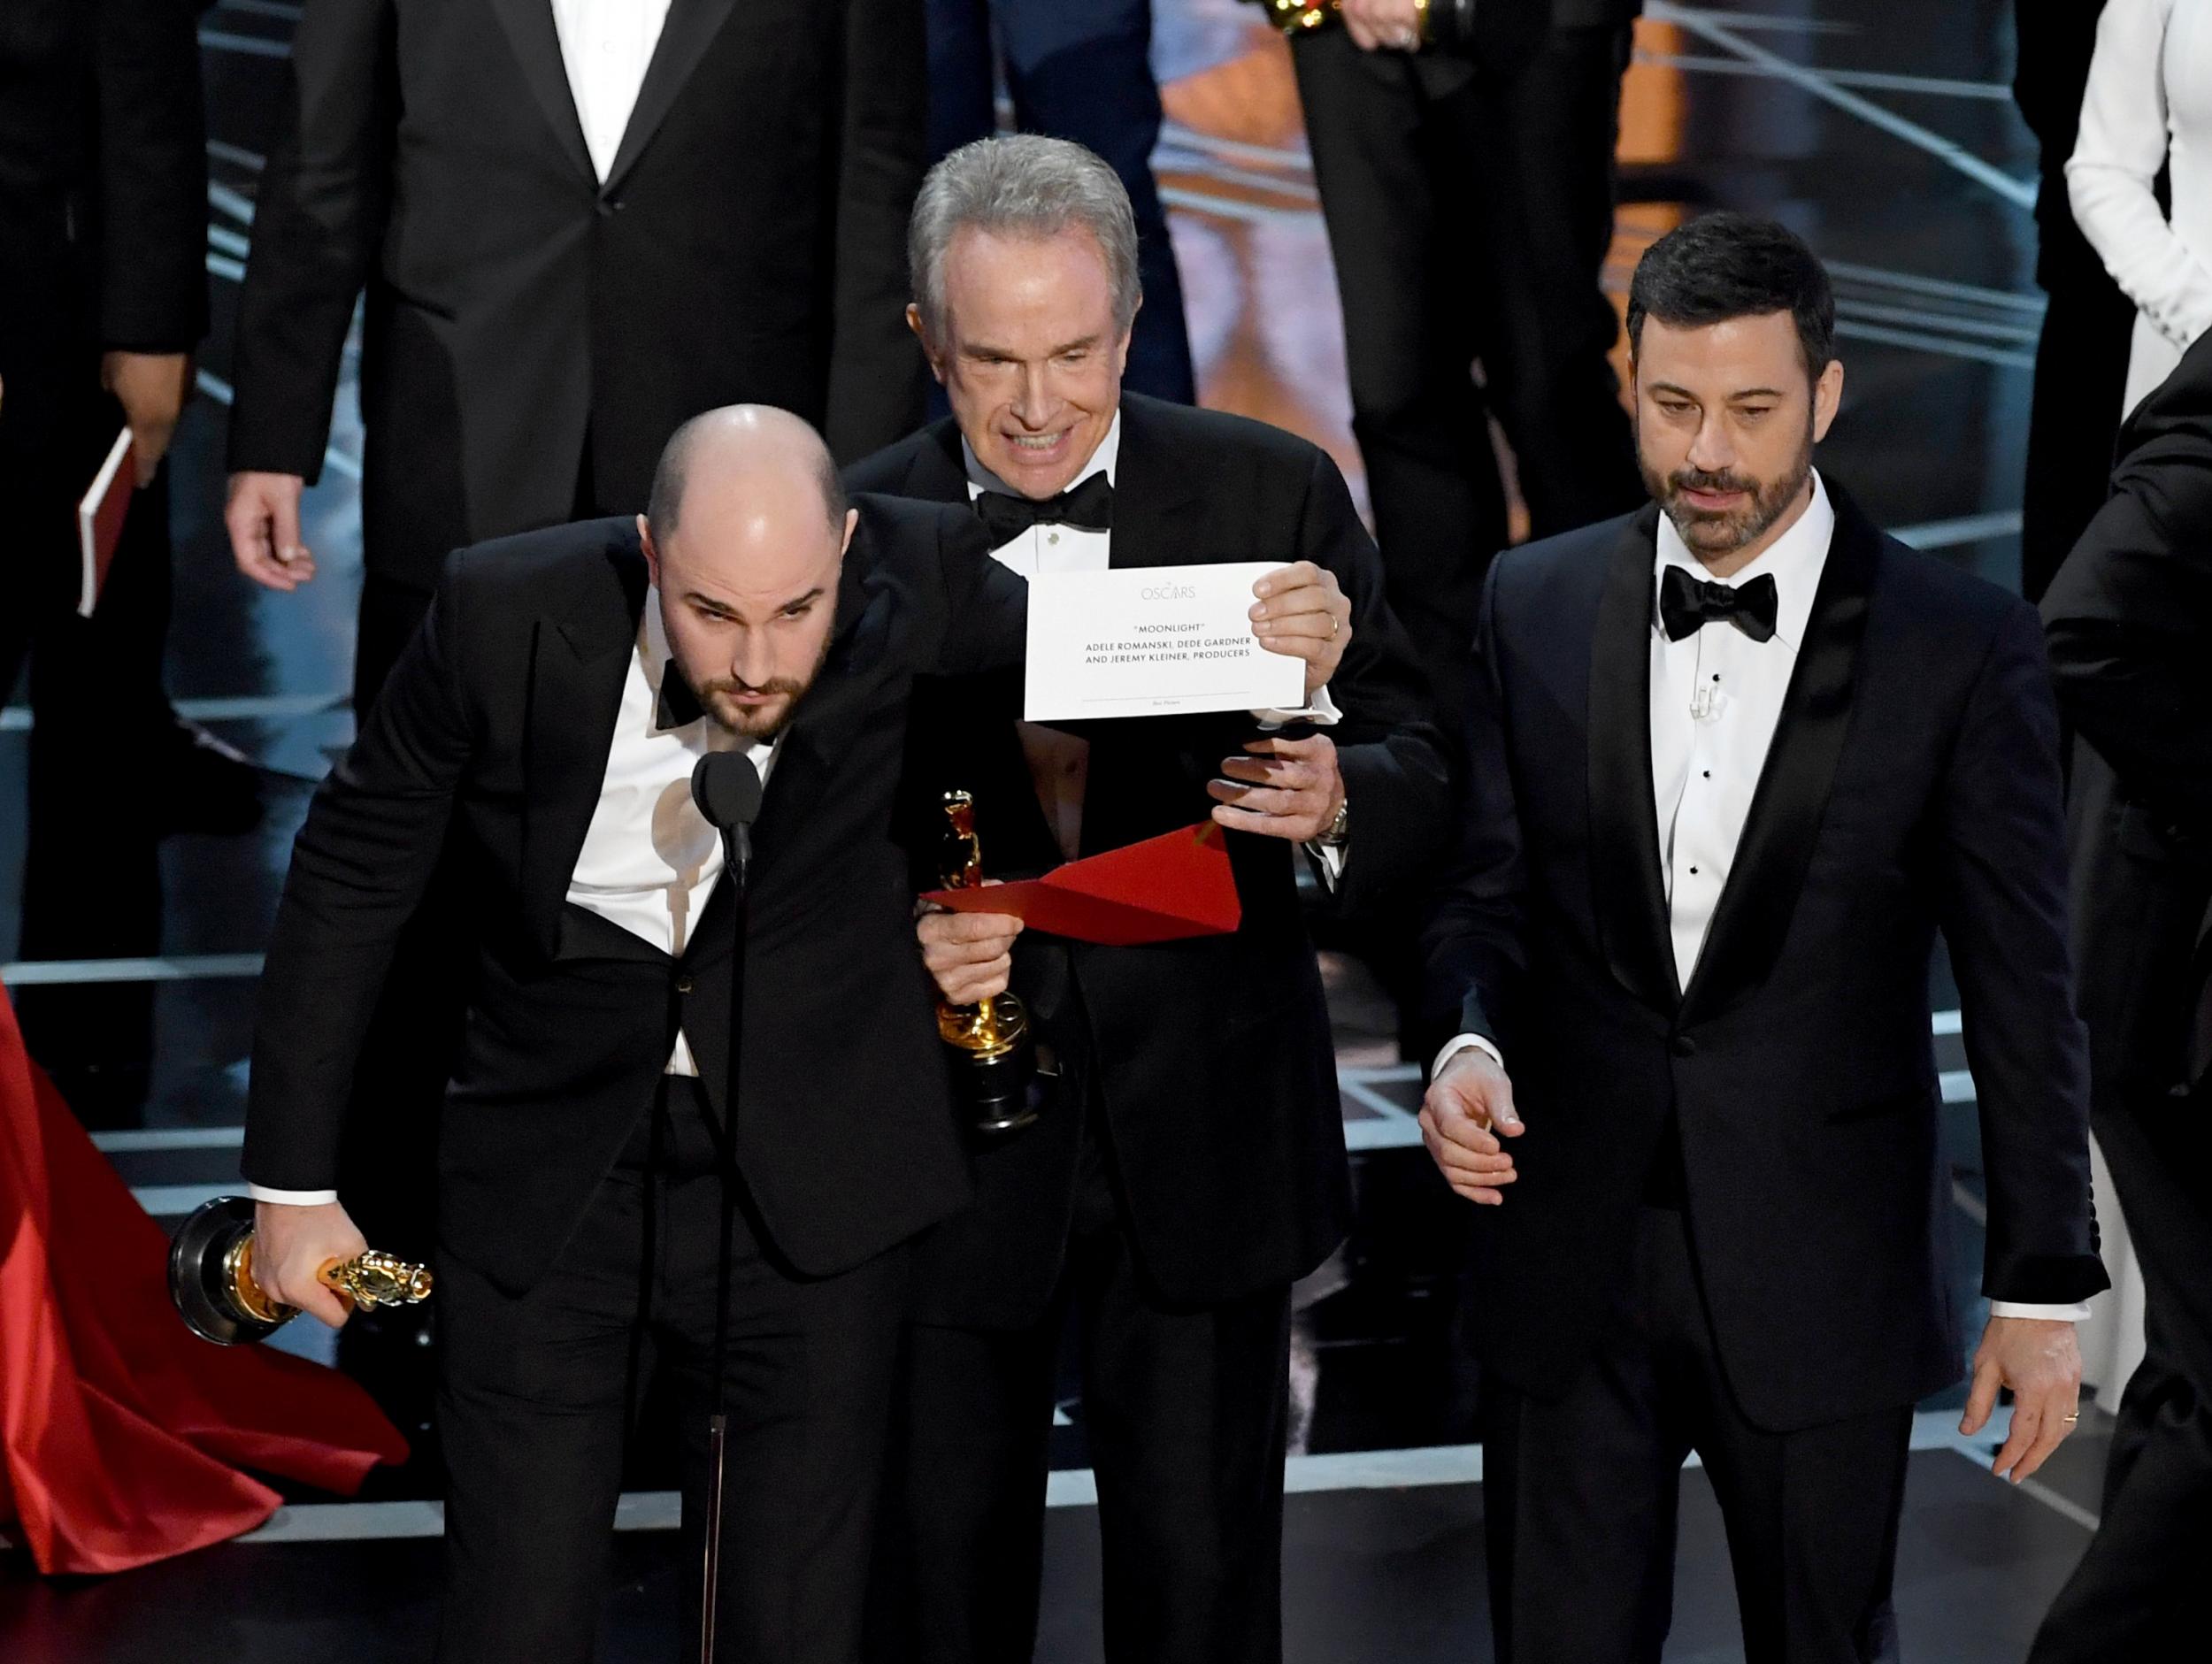 Producer, Jordan Horowitz, held the envelope, saying: “There’s a mistake. ‘Moonlight,’ you guys won best picture”